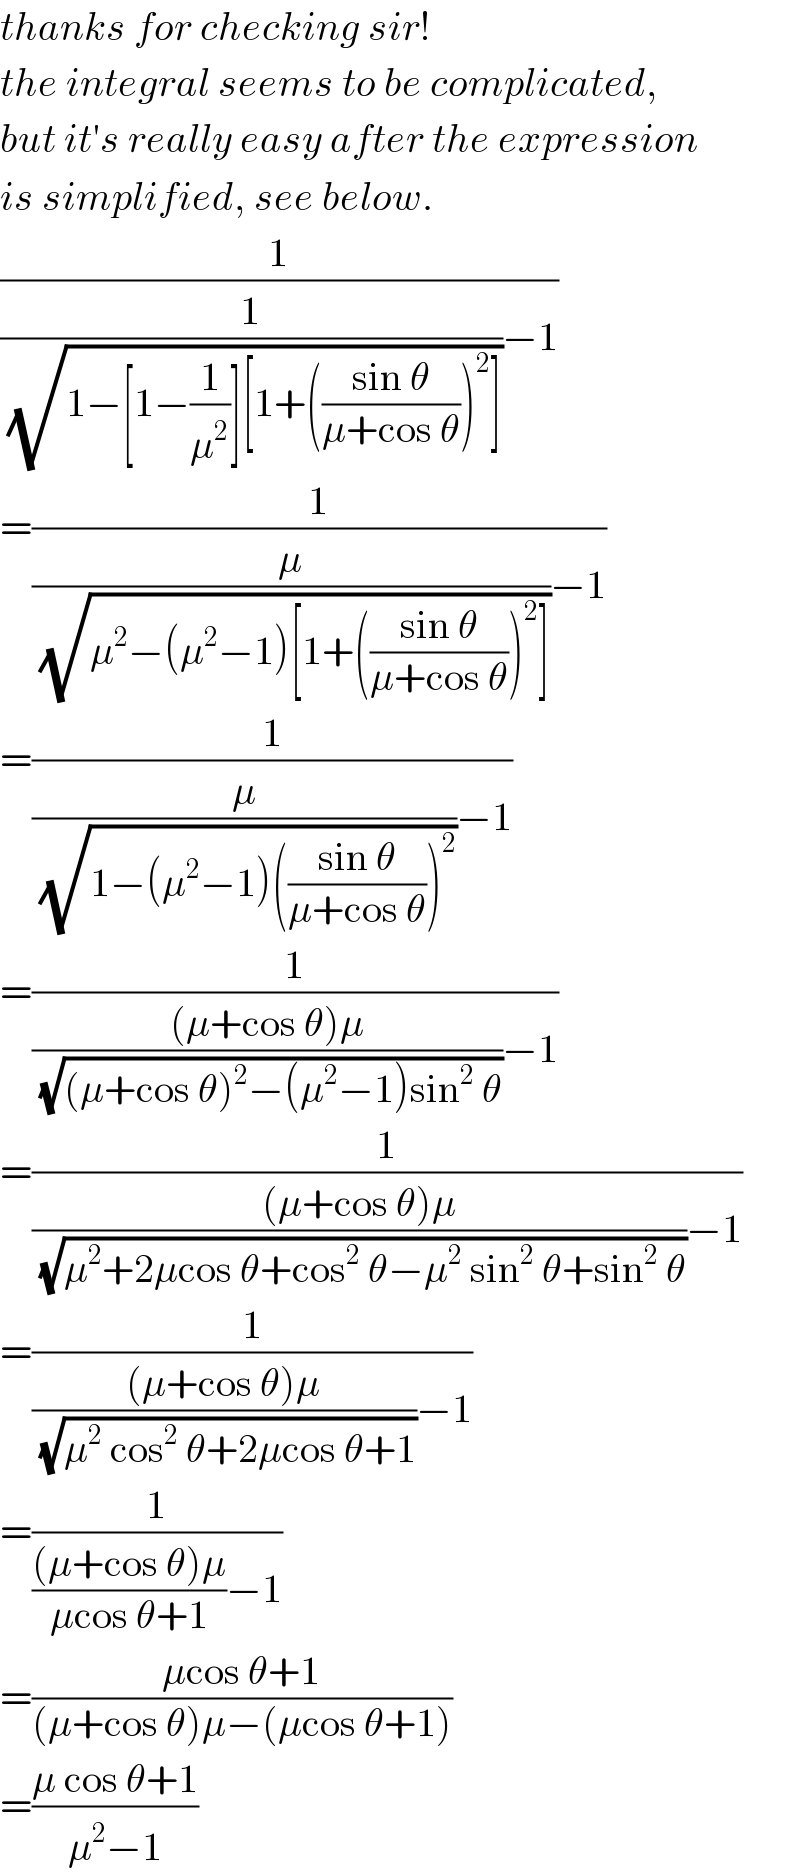 thanks for checking sir!  the integral seems to be complicated,  but it′s really easy after the expression  is simplified, see below.  (1/((1/(√(1−[1−(1/μ^2 )][1+(((sin θ)/(μ+cos θ)))^2 ])))−1))  =(1/((μ/(√(μ^2 −(μ^2 −1)[1+(((sin θ)/(μ+cos θ)))^2 ])))−1))  =(1/((μ/(√(1−(μ^2 −1)(((sin θ)/(μ+cos θ)))^2 )))−1))  =(1/((((μ+cos θ)μ)/(√((μ+cos θ)^2 −(μ^2 −1)sin^2  θ)))−1))  =(1/((((μ+cos θ)μ)/(√(μ^2 +2μcos θ+cos^2  θ−μ^2  sin^2  θ+sin^2  θ)))−1))  =(1/((((μ+cos θ)μ)/(√(μ^2  cos^2  θ+2μcos θ+1)))−1))  =(1/((((μ+cos θ)μ)/(μcos θ+1))−1))  =((μcos θ+1)/((μ+cos θ)μ−(μcos θ+1)))  =((μ cos θ+1)/(μ^2 −1))  